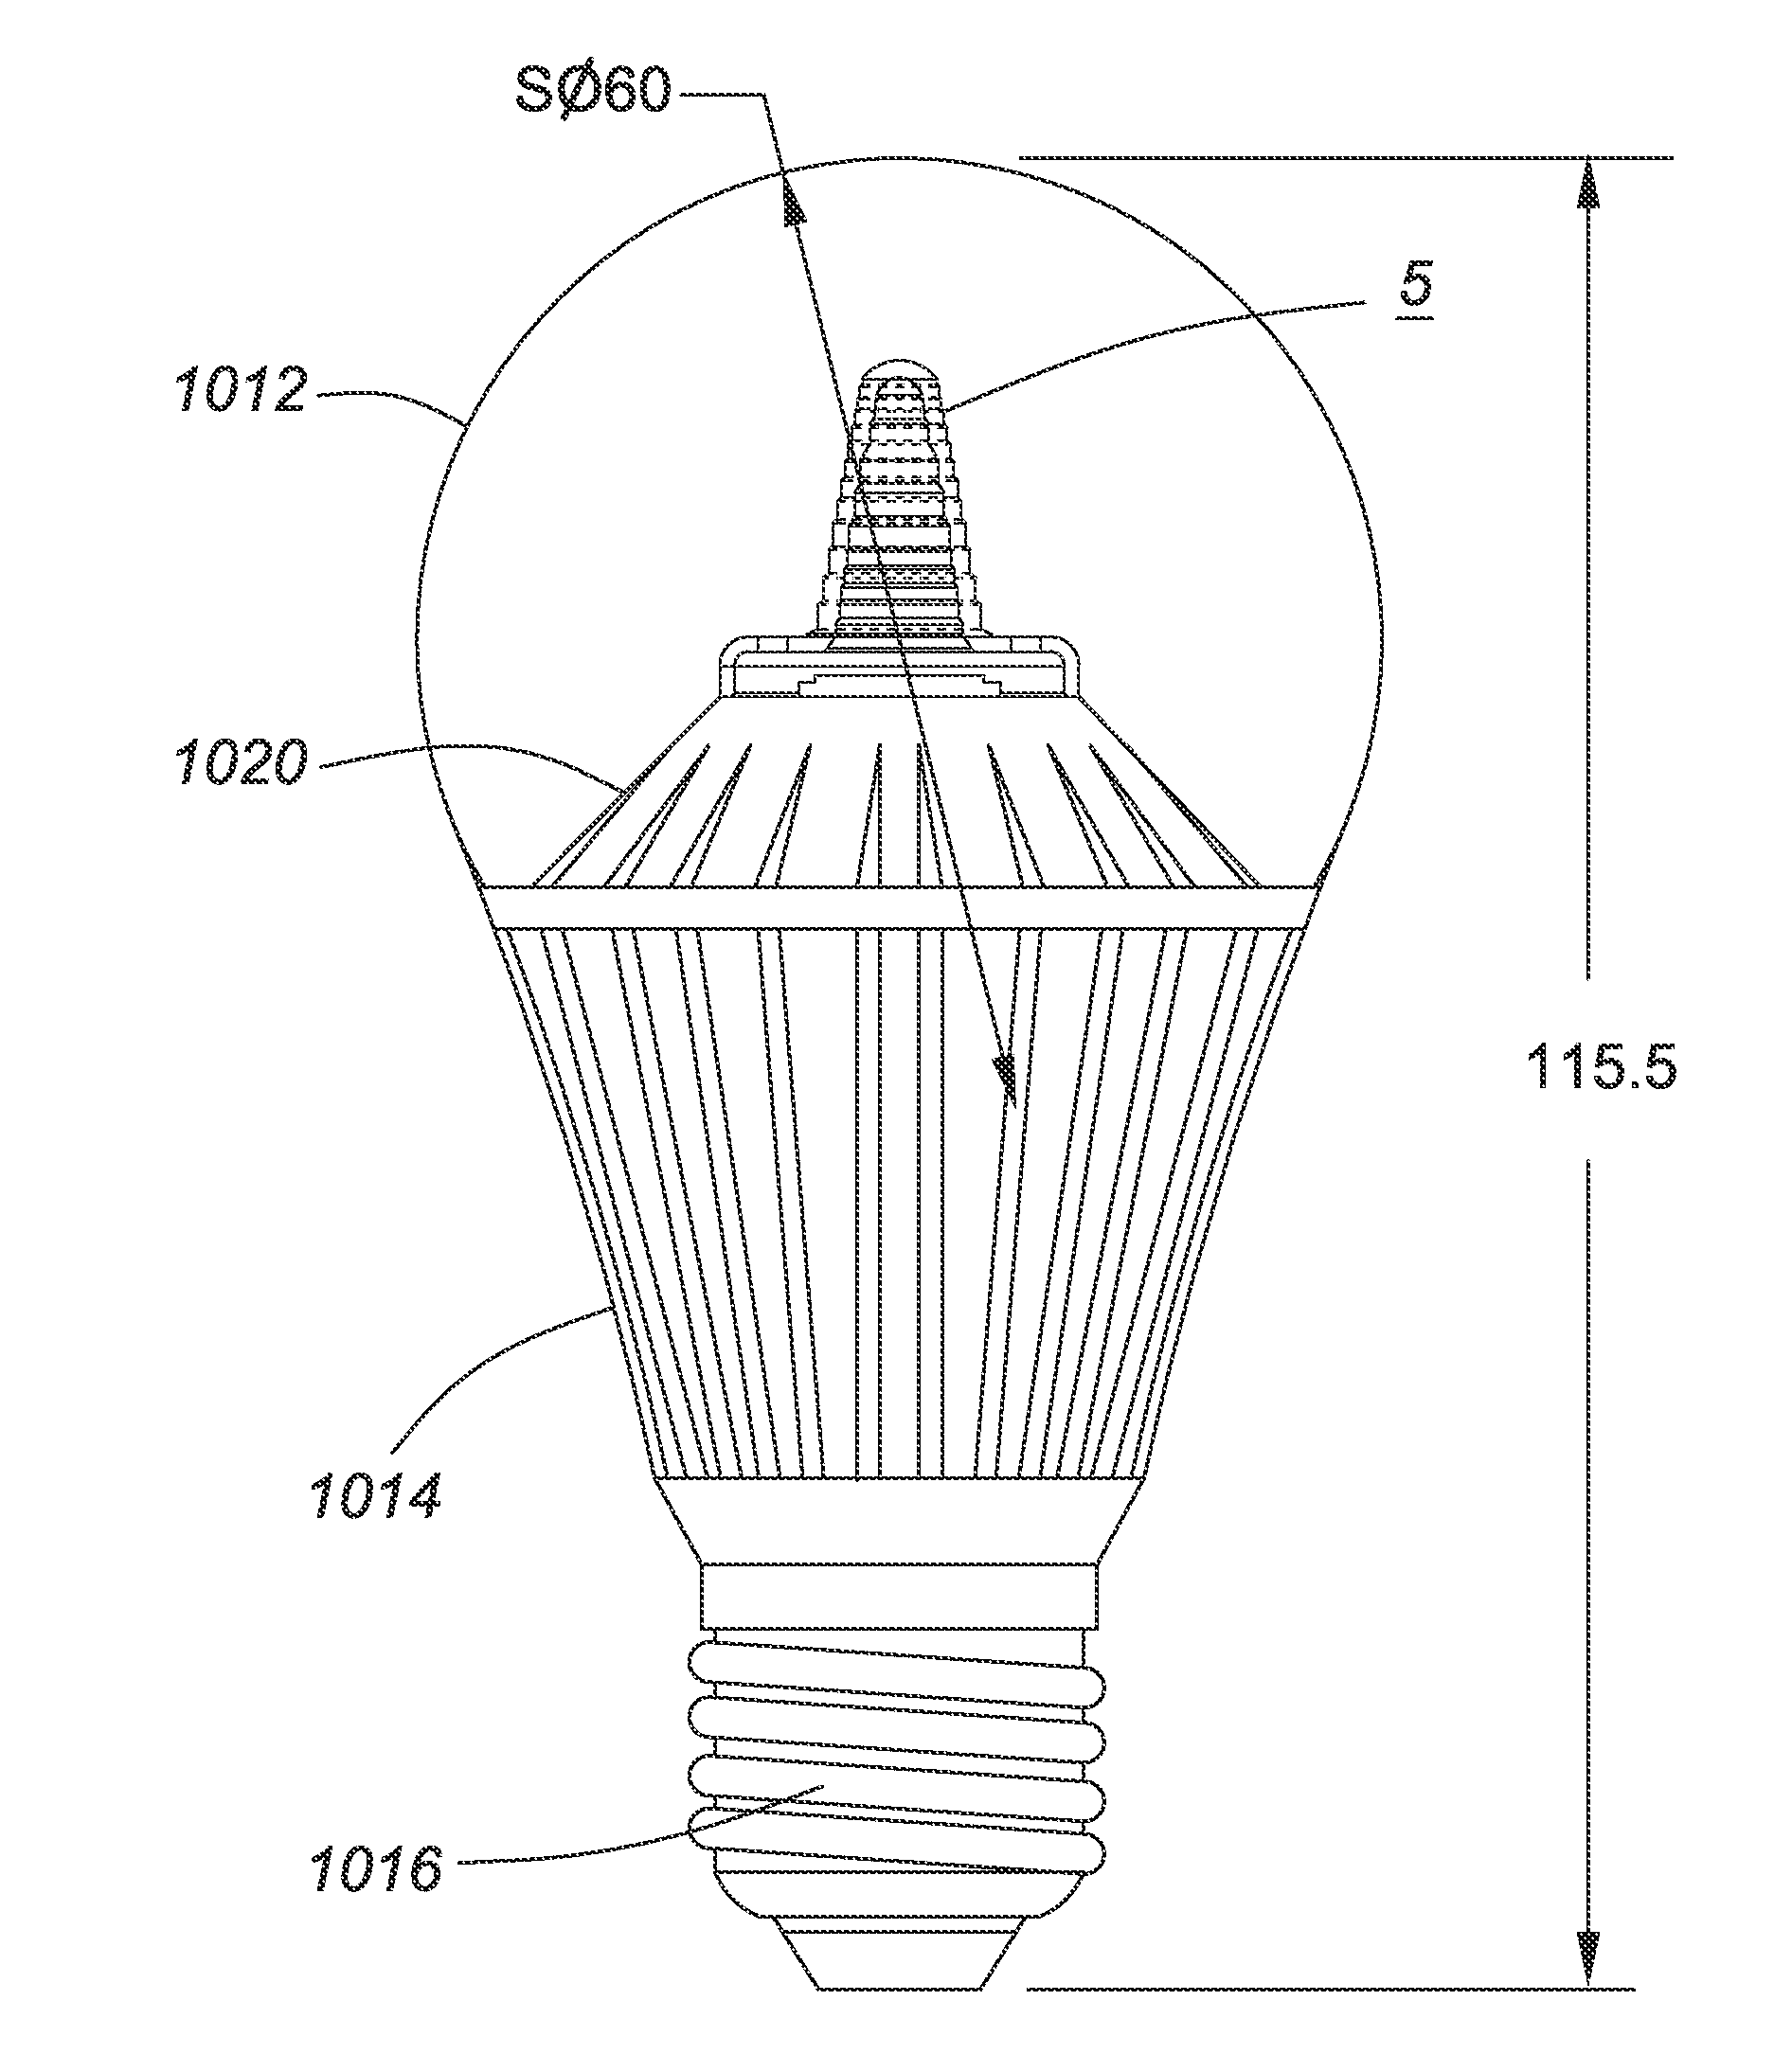 Optical device and system for solid-state lighting